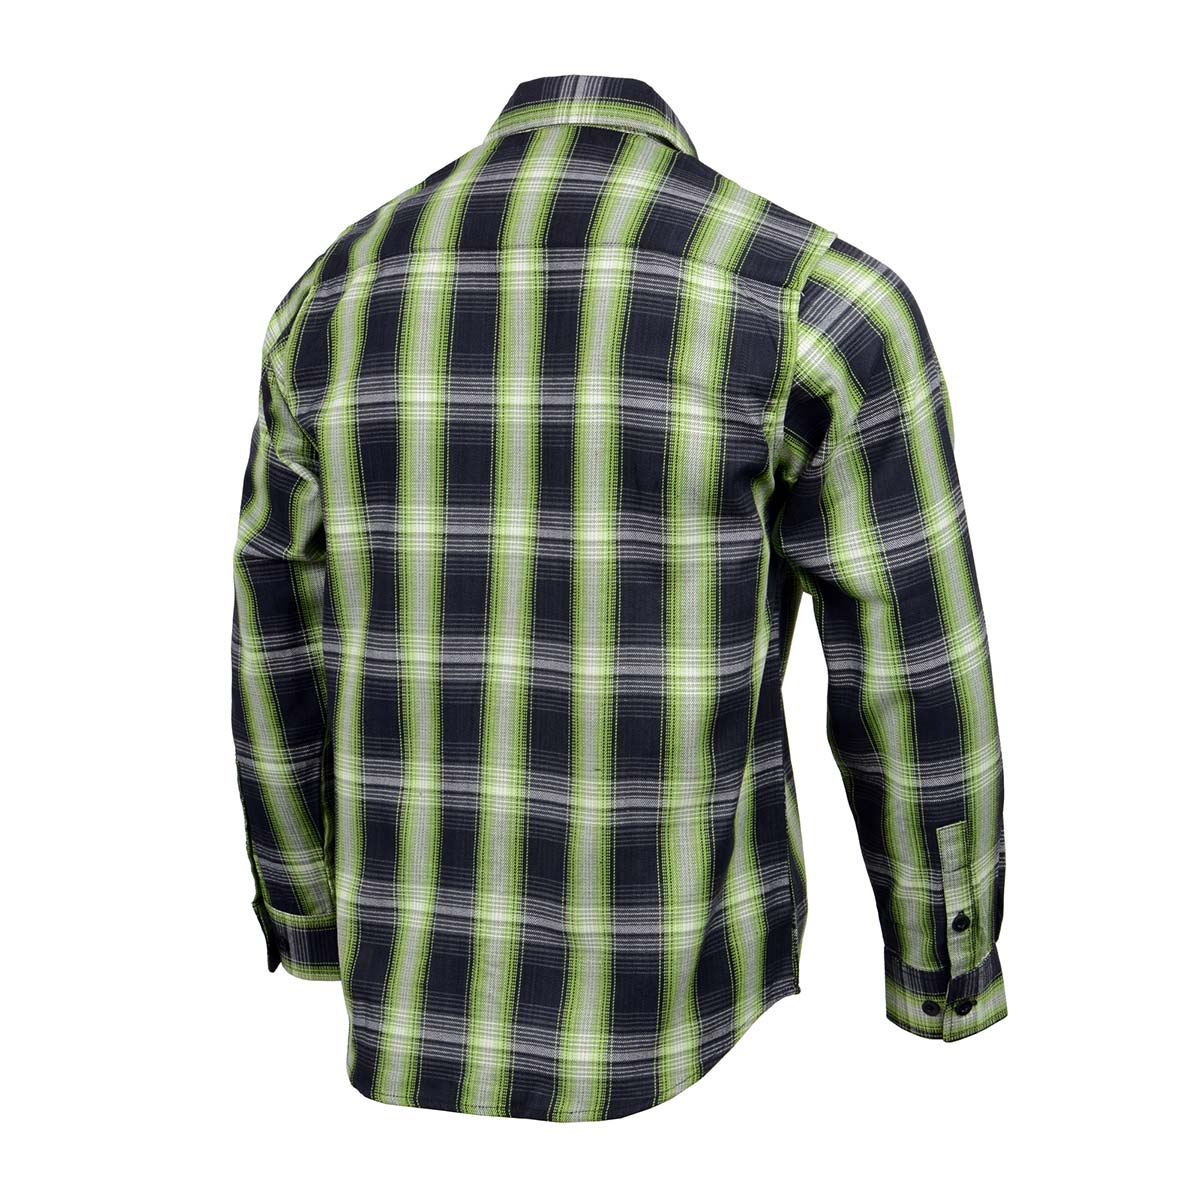 Men's Black and Green with White Long Sleeve Cotton Flannel Shirt